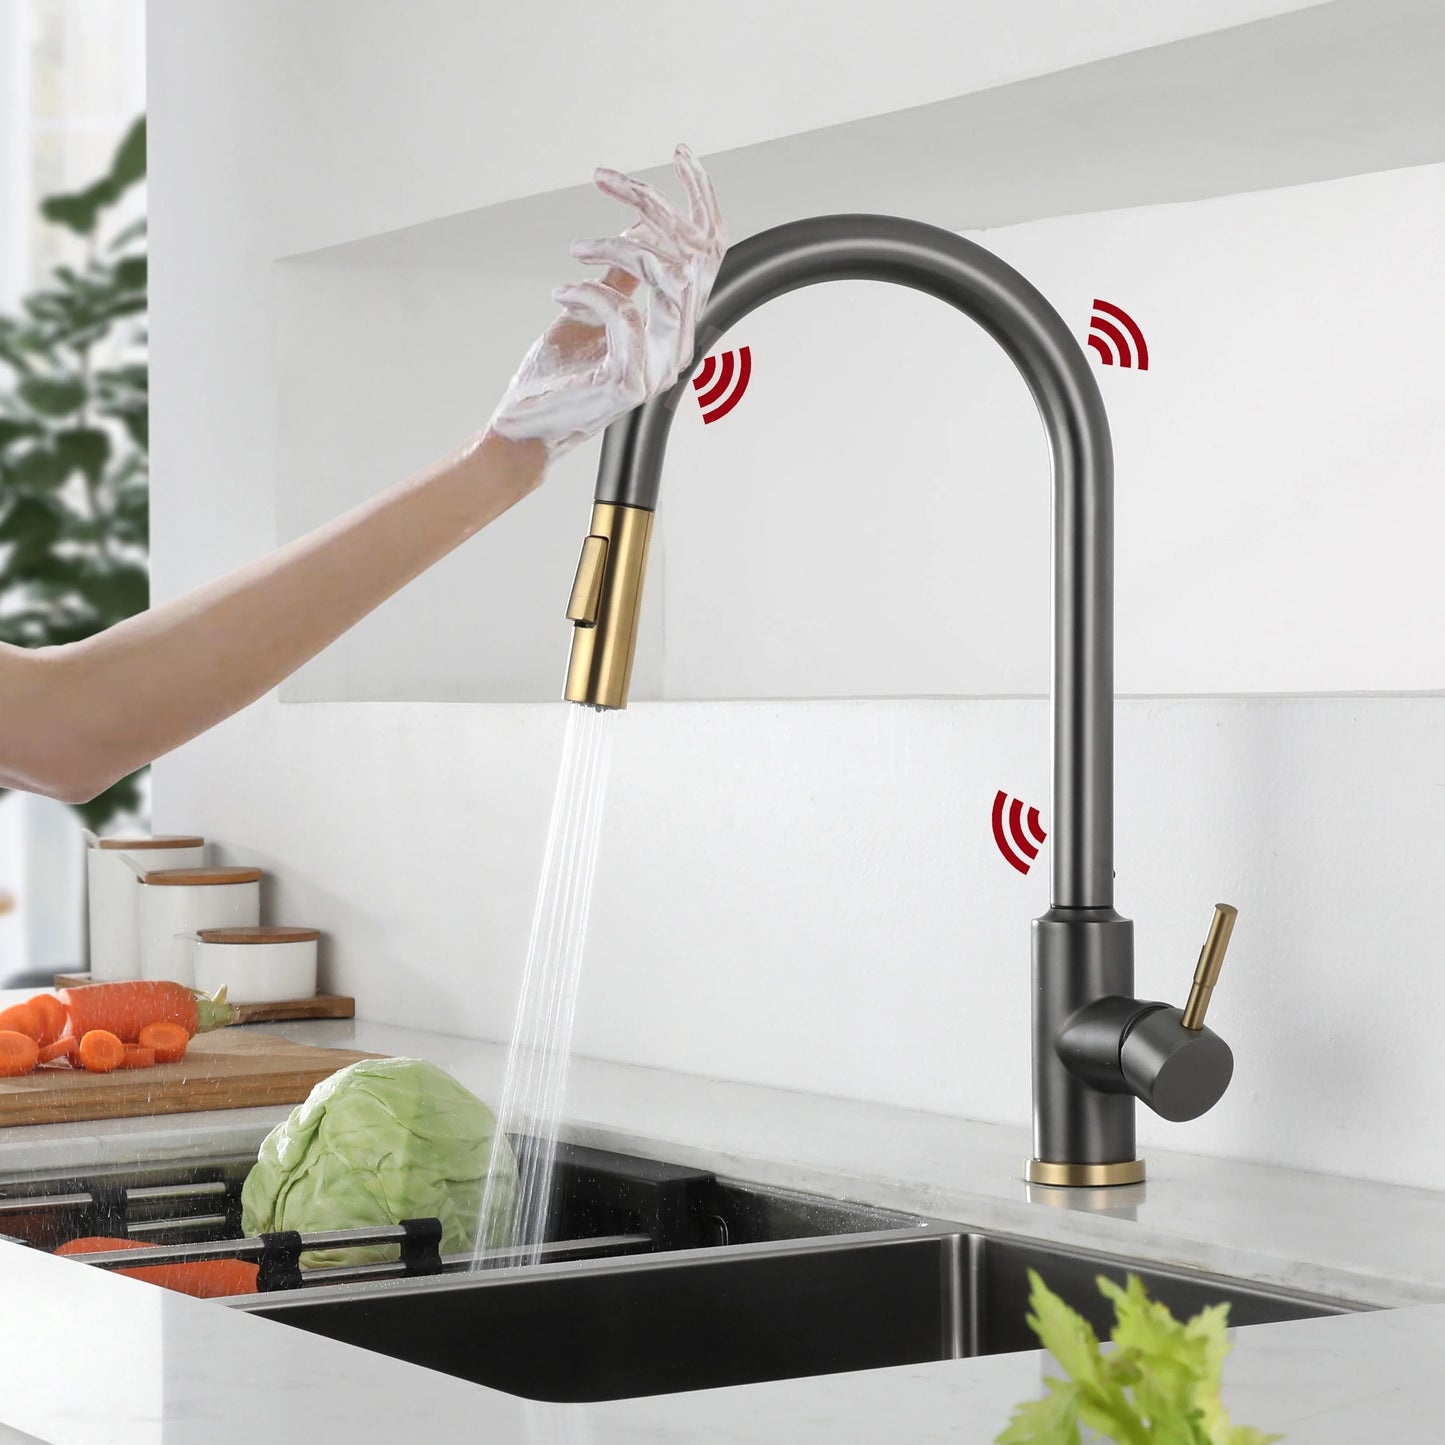 A|M Aquae Gunmetal and Gold Touch Kitchen Faucet with Pull Down Sprayer